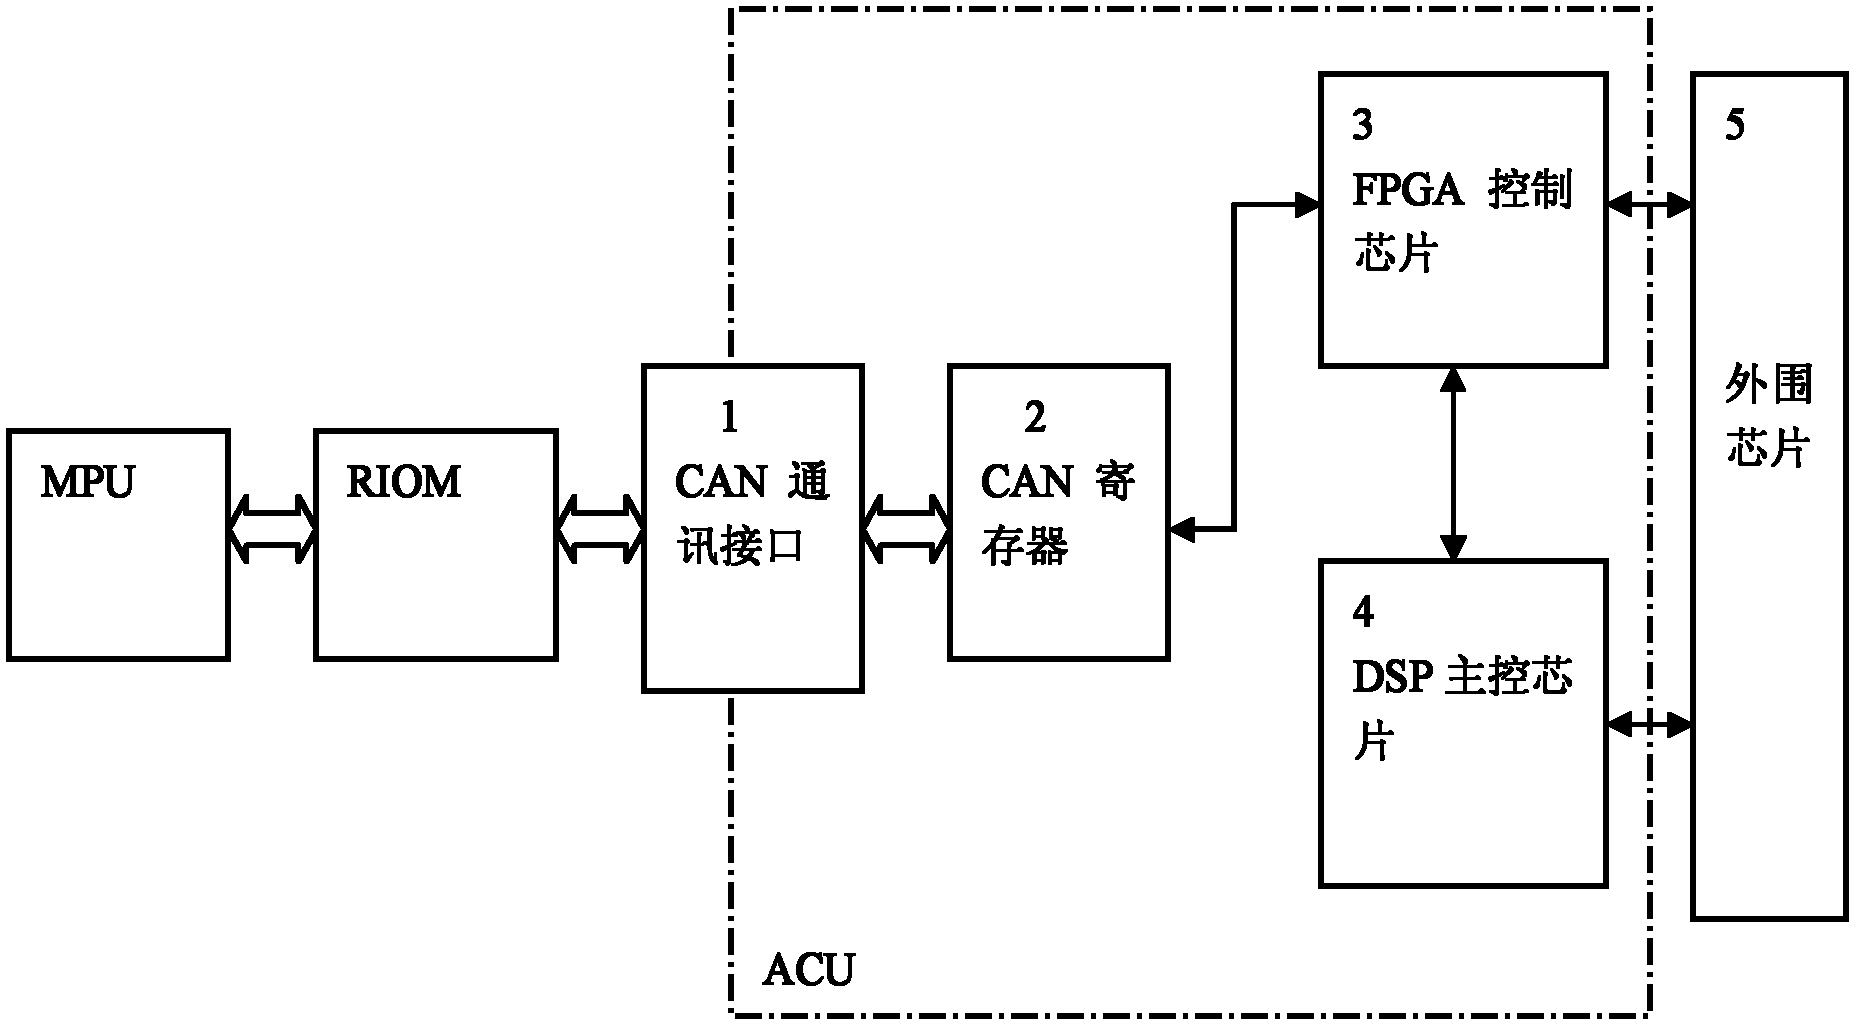 Controller area network (CAN)-control-based auxiliary control unit for locomotive